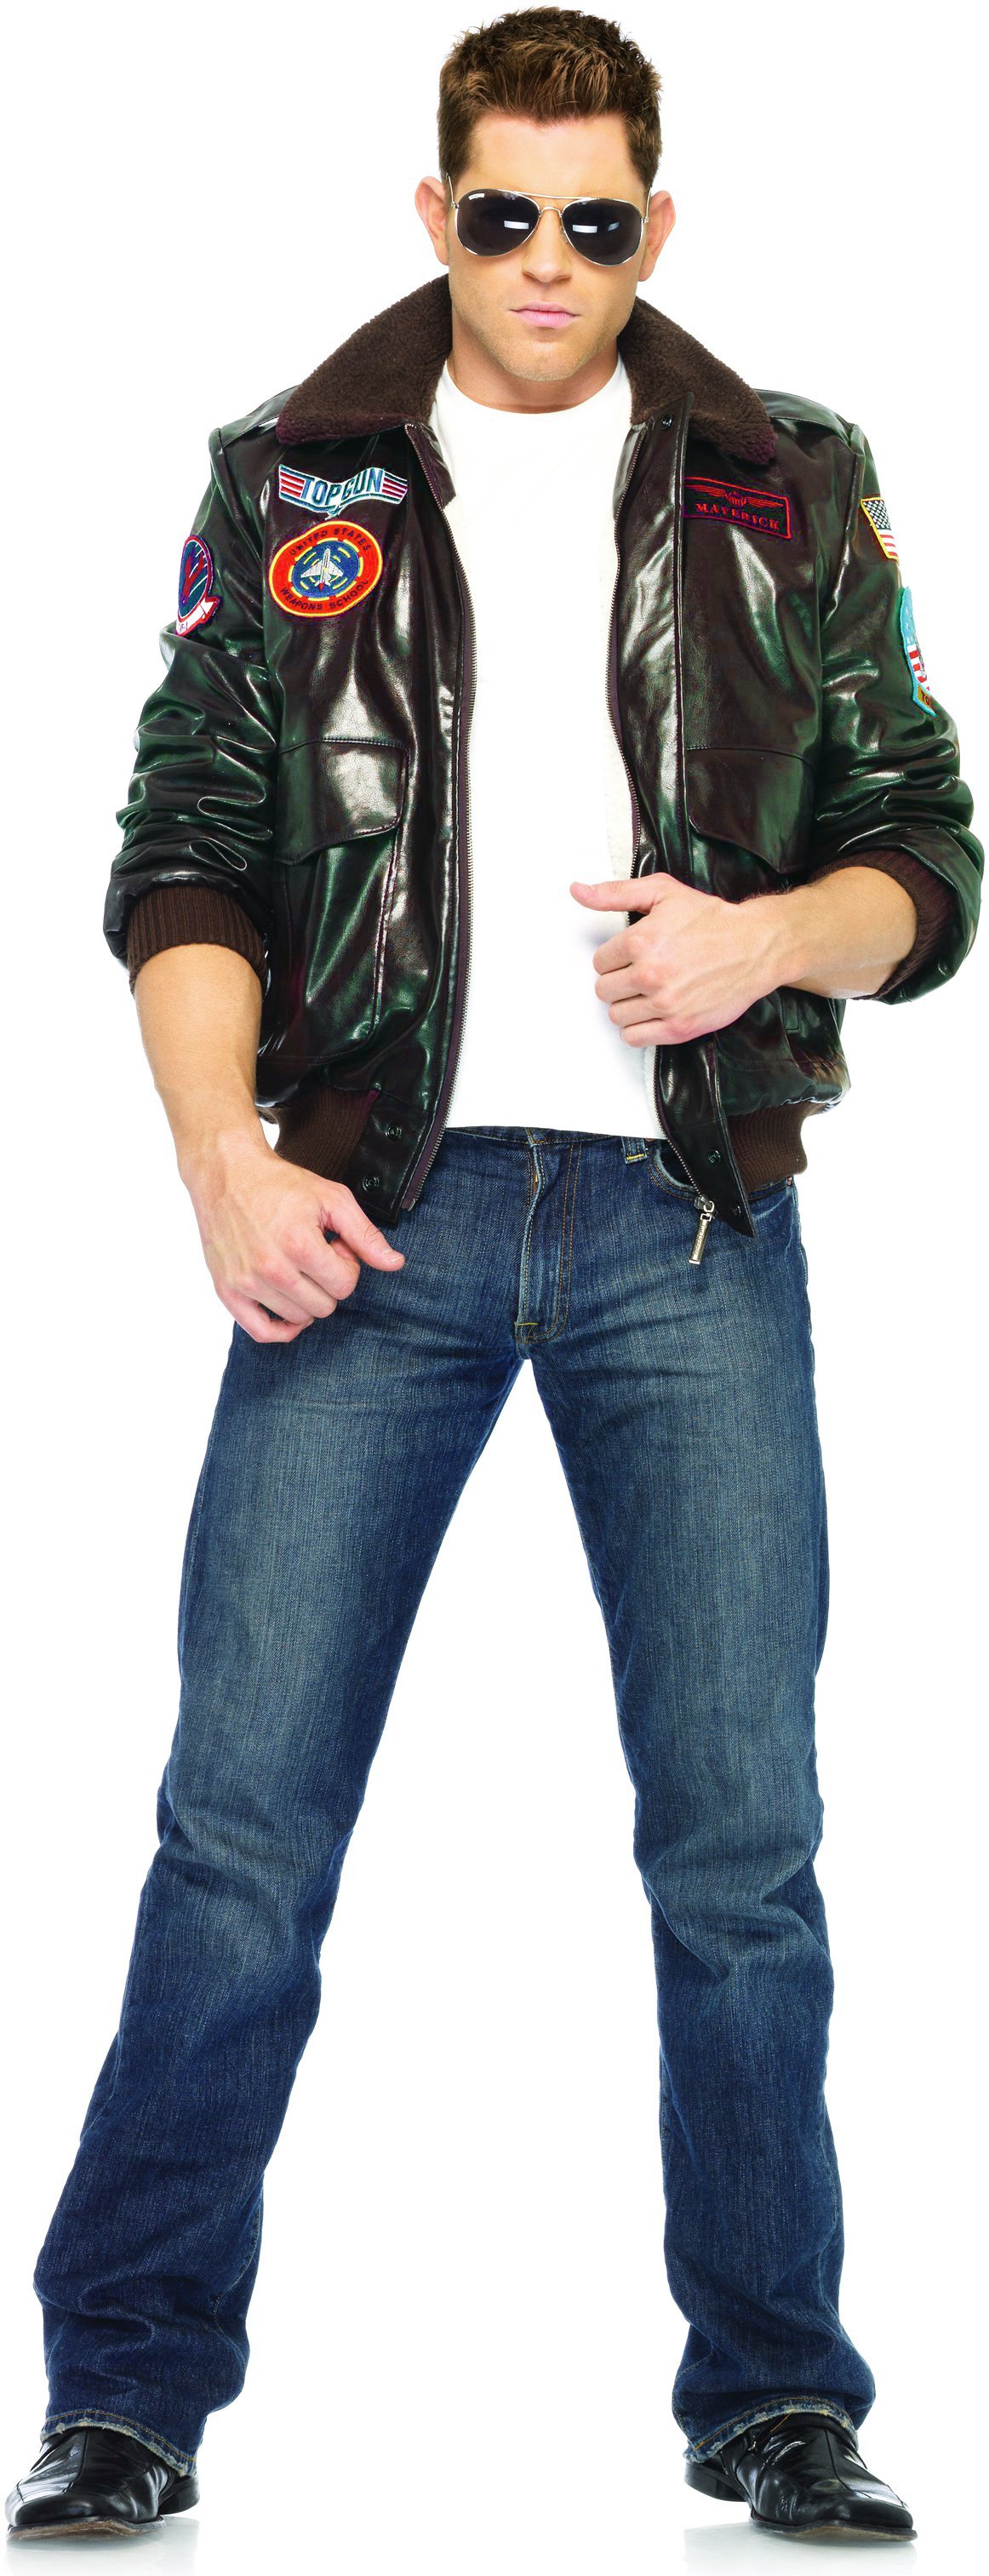 Top Gun Bomber Jacket Adult Costume (Male) - Click Image to Close